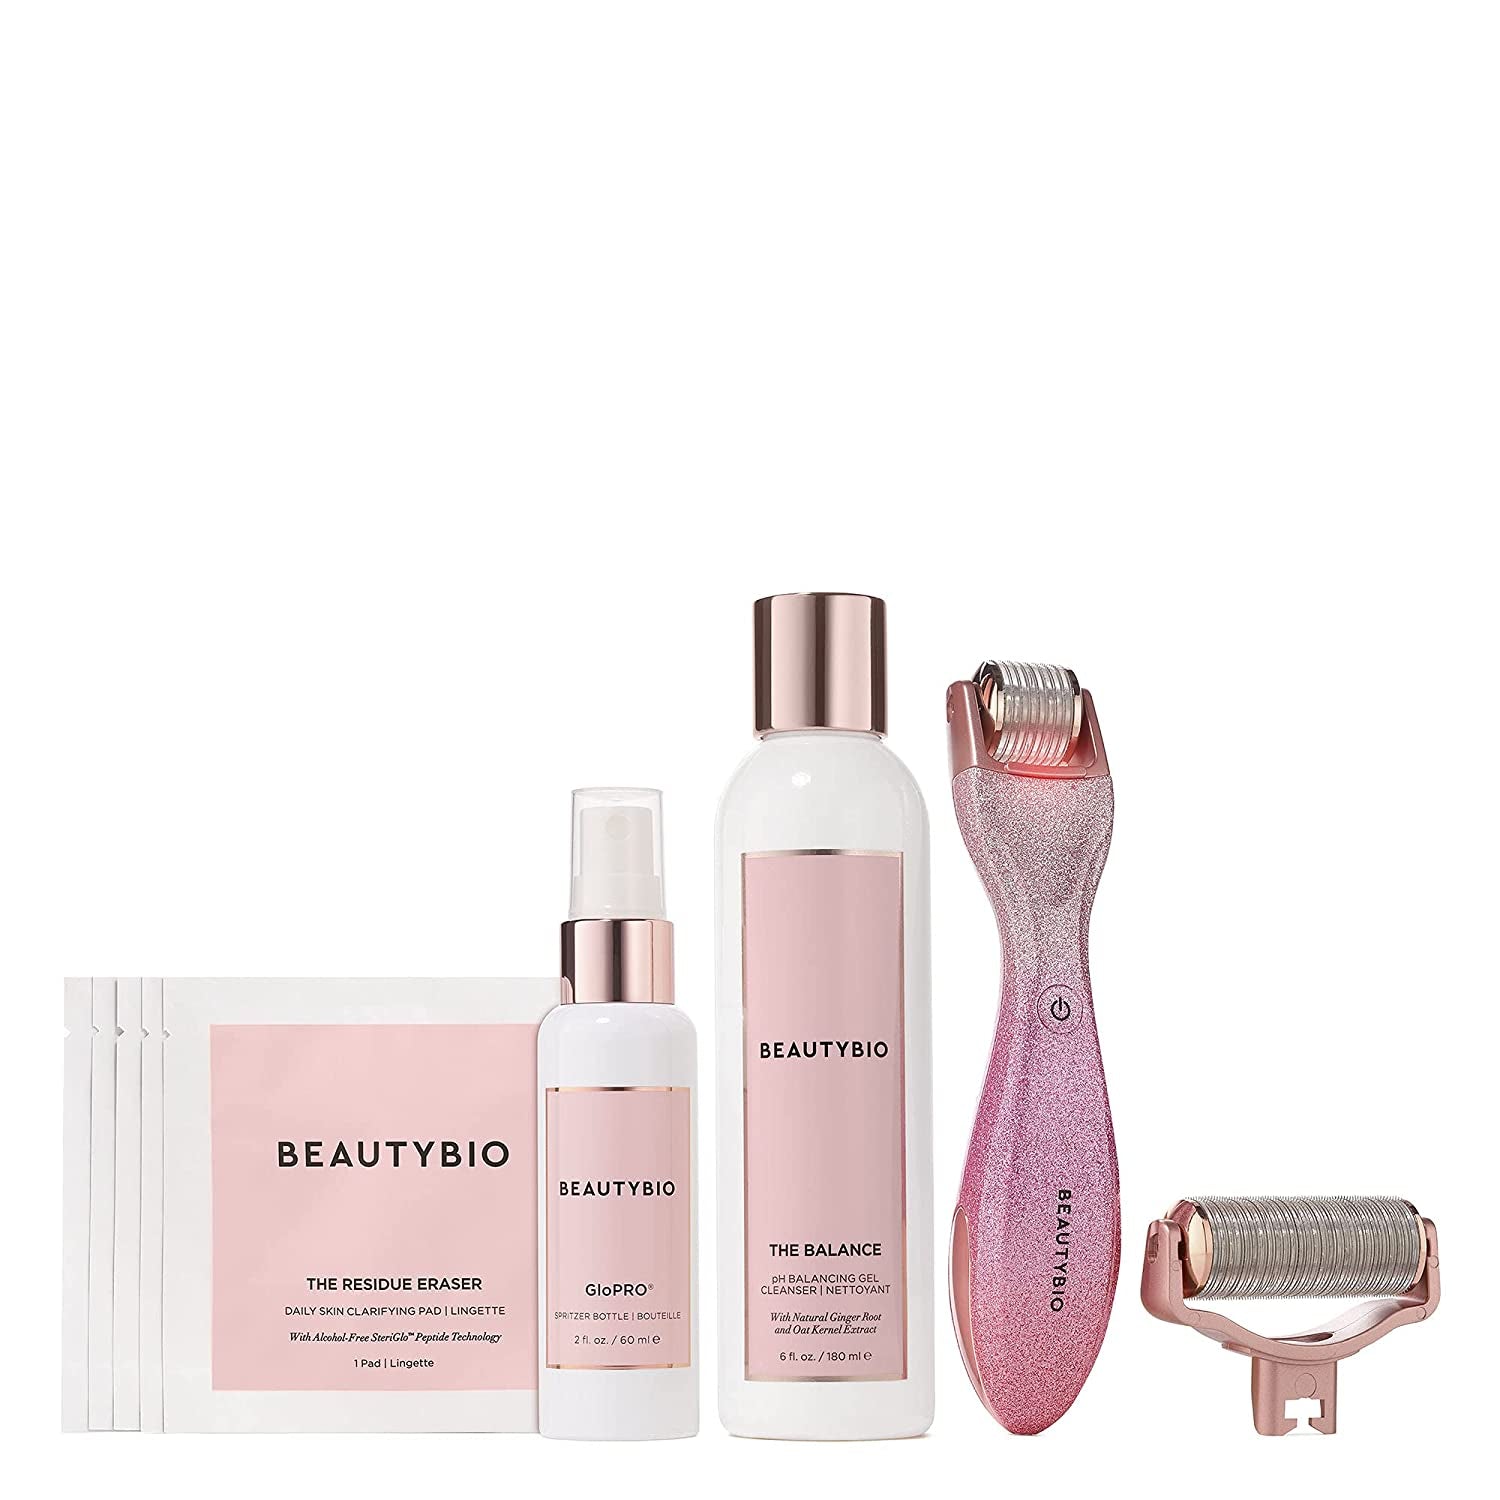 Beautybio Skin That Glitters. Glopro Tool, Face and Body Attachment Heads, the Balance and 5 Prep Pads, 1 Ct.